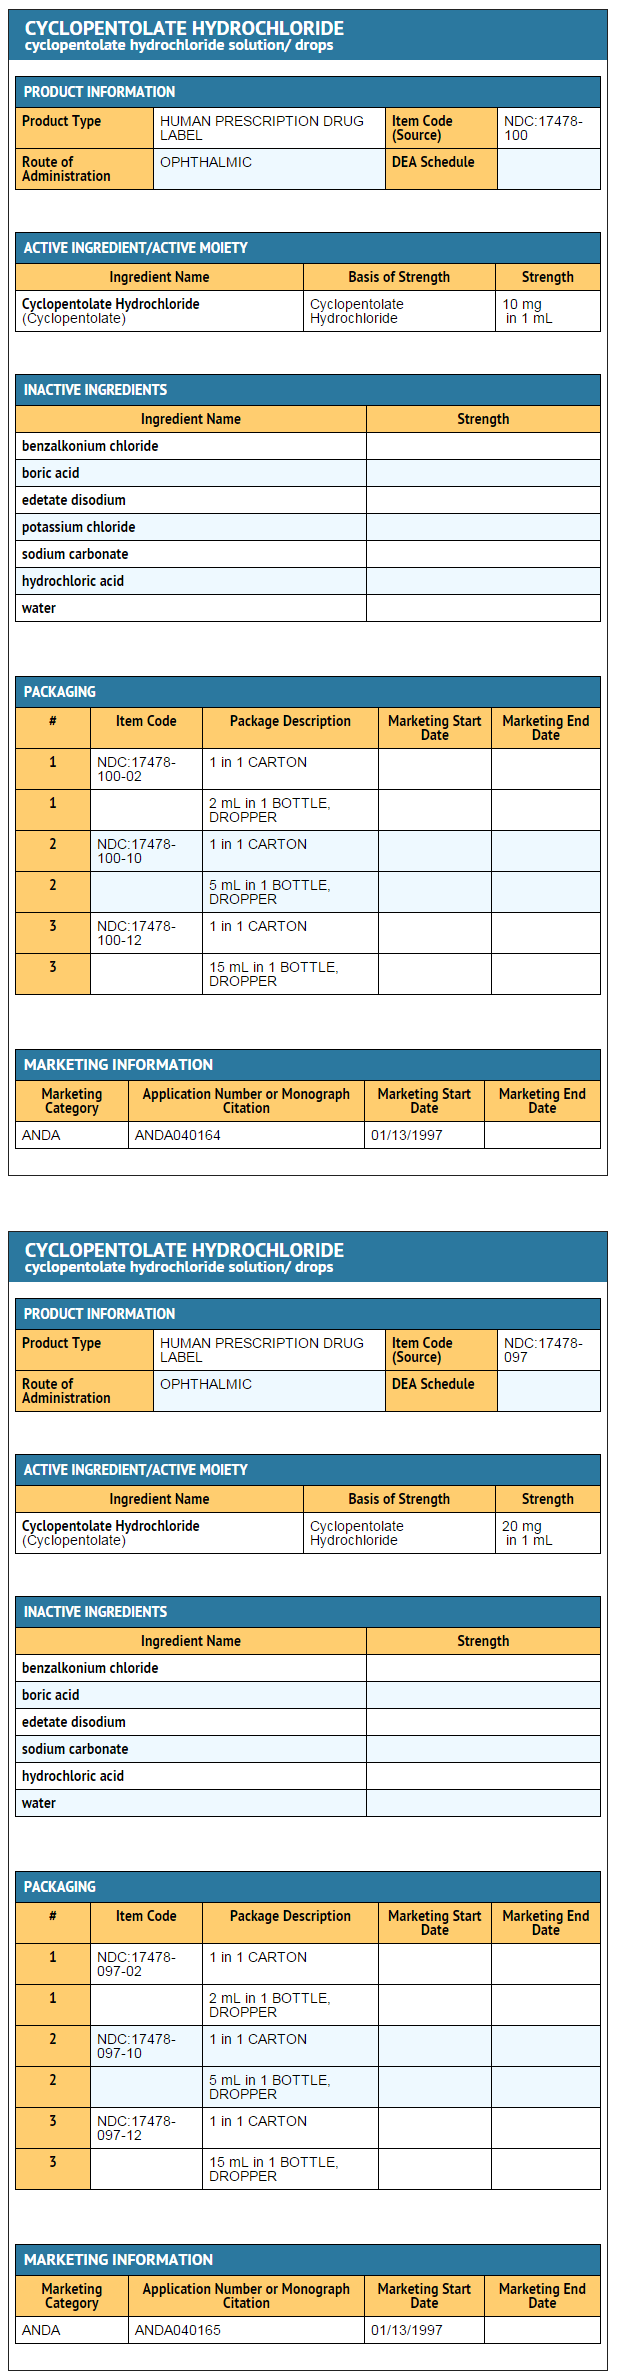 File:Cyclopentolate Ing and App.png